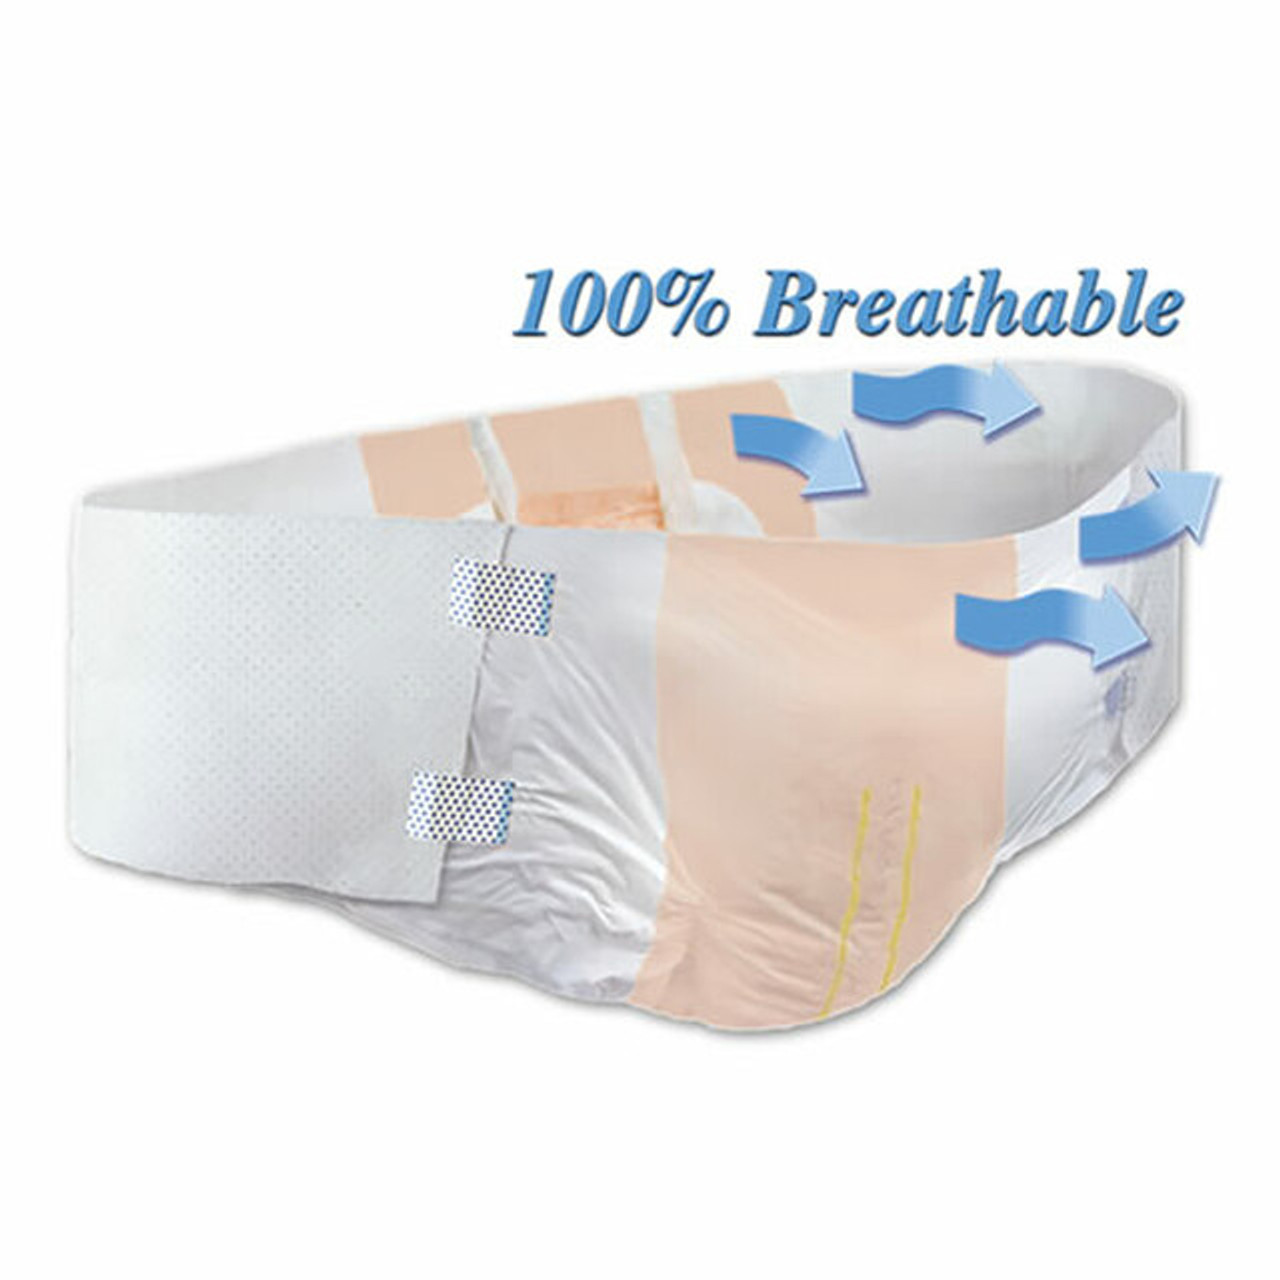  Tranquility Products Bariatric Disposable Briefs